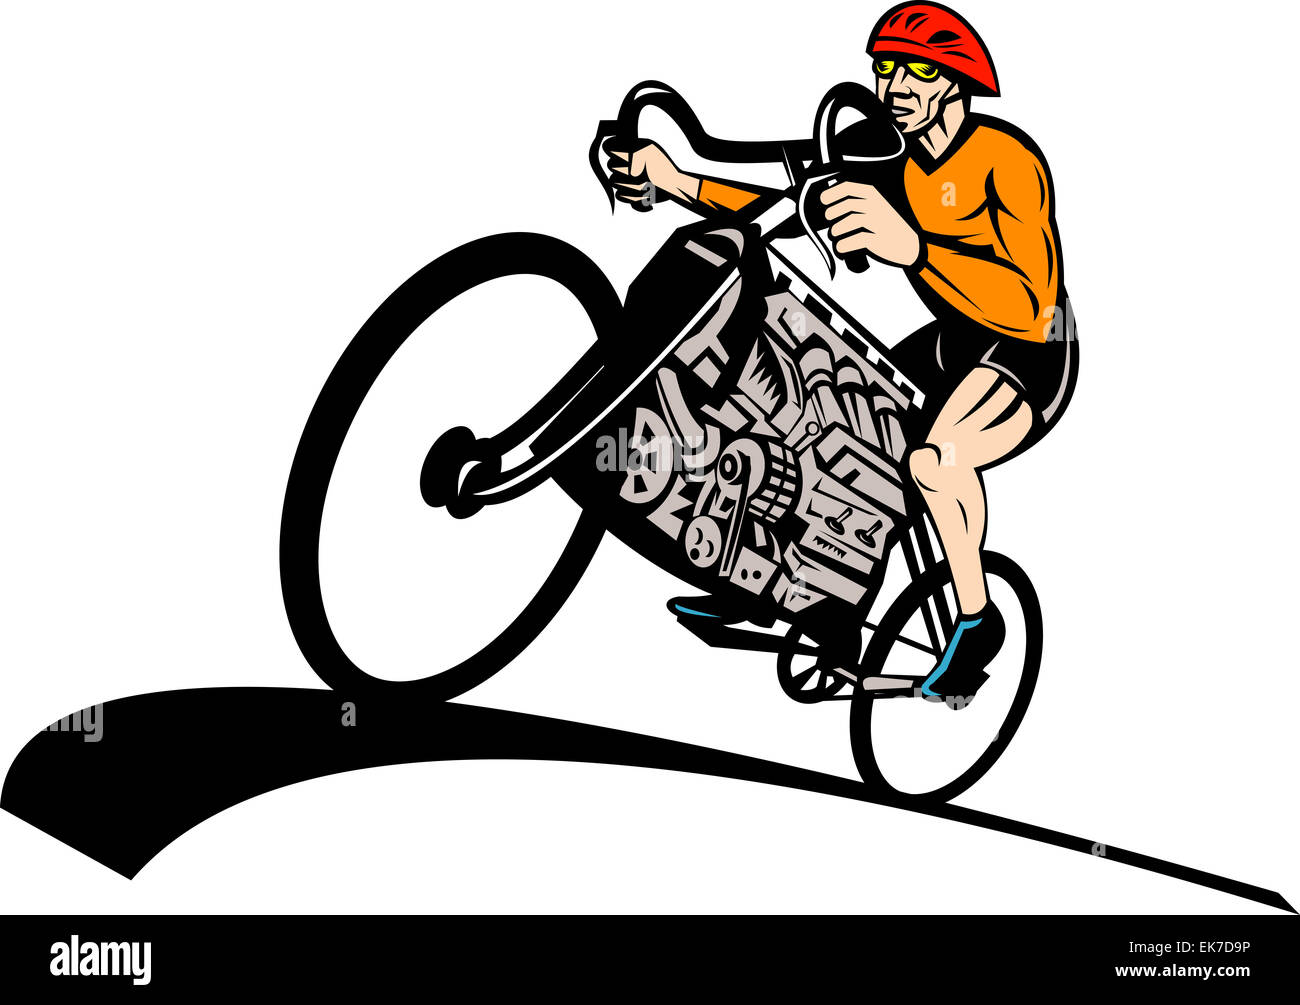 Cyclist riding racing bicycle with v8 car engine Stock Photo